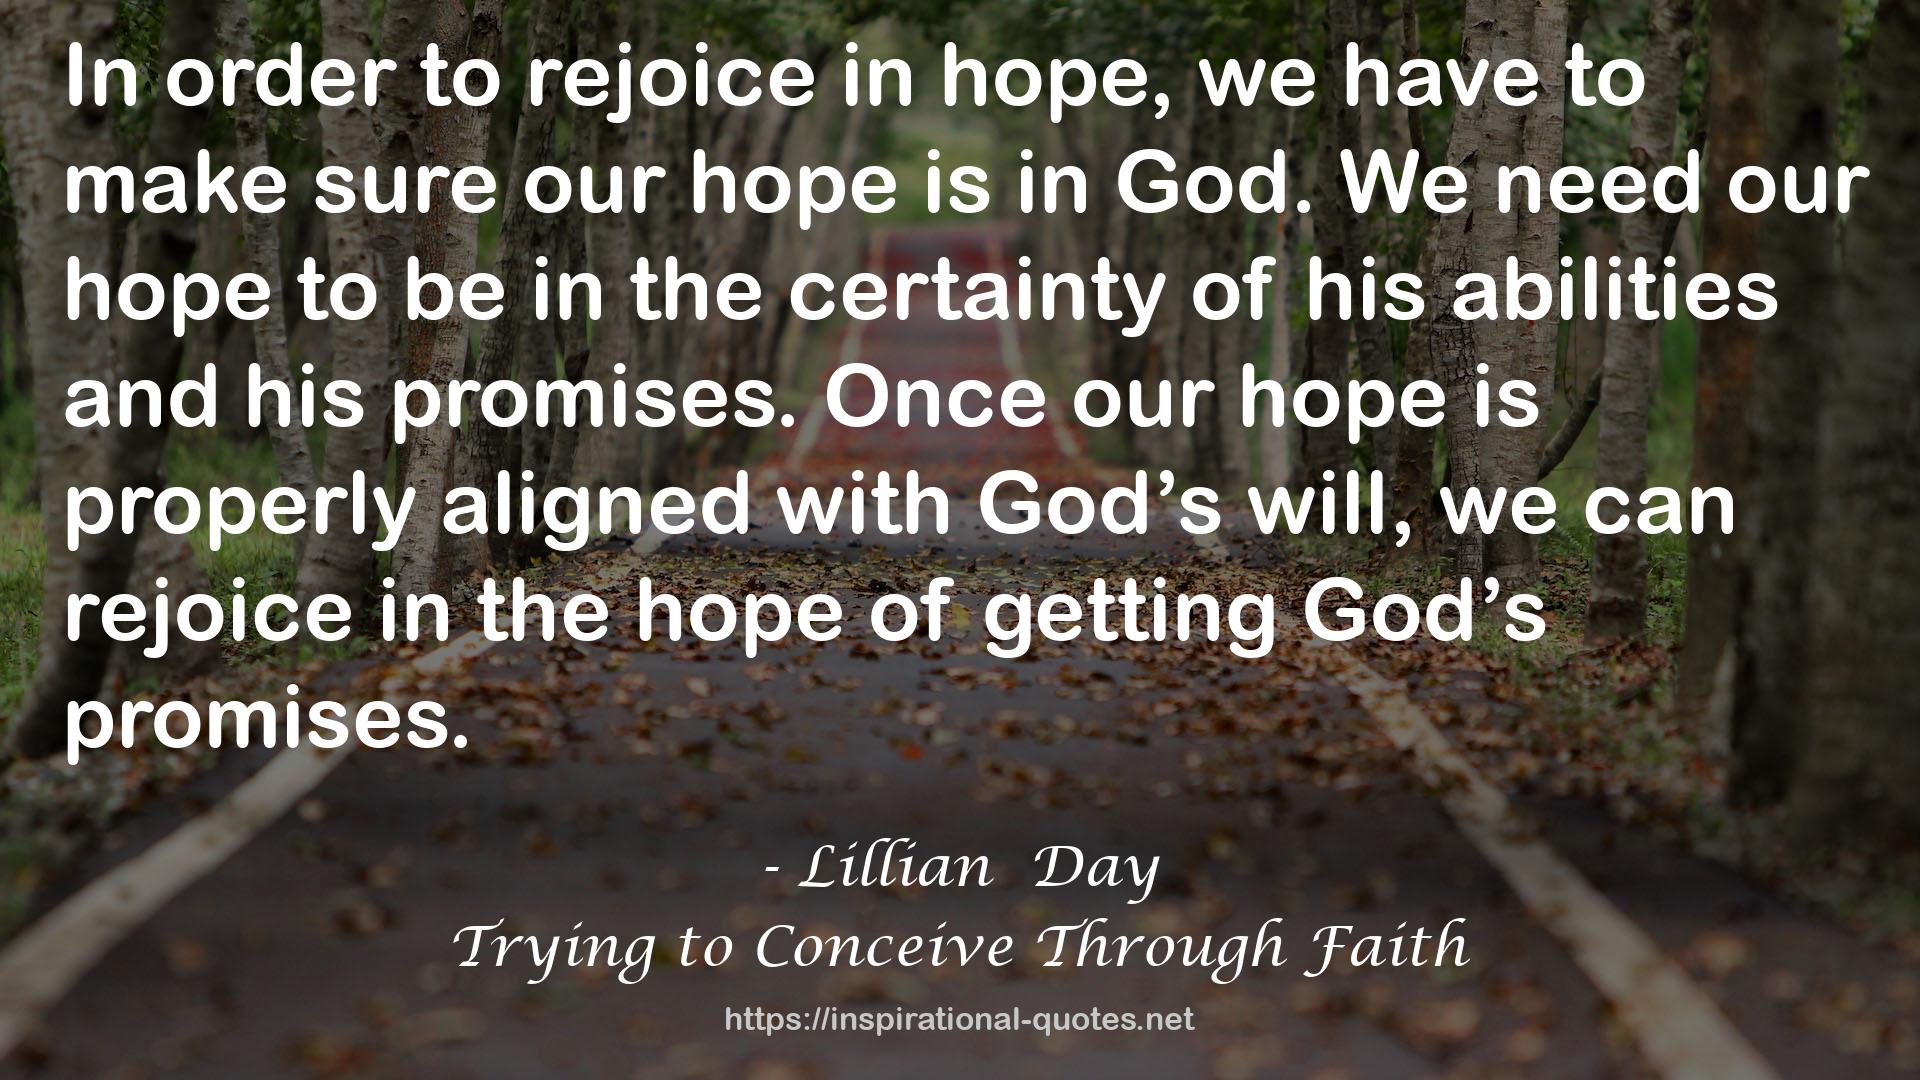 Trying to Conceive Through Faith QUOTES